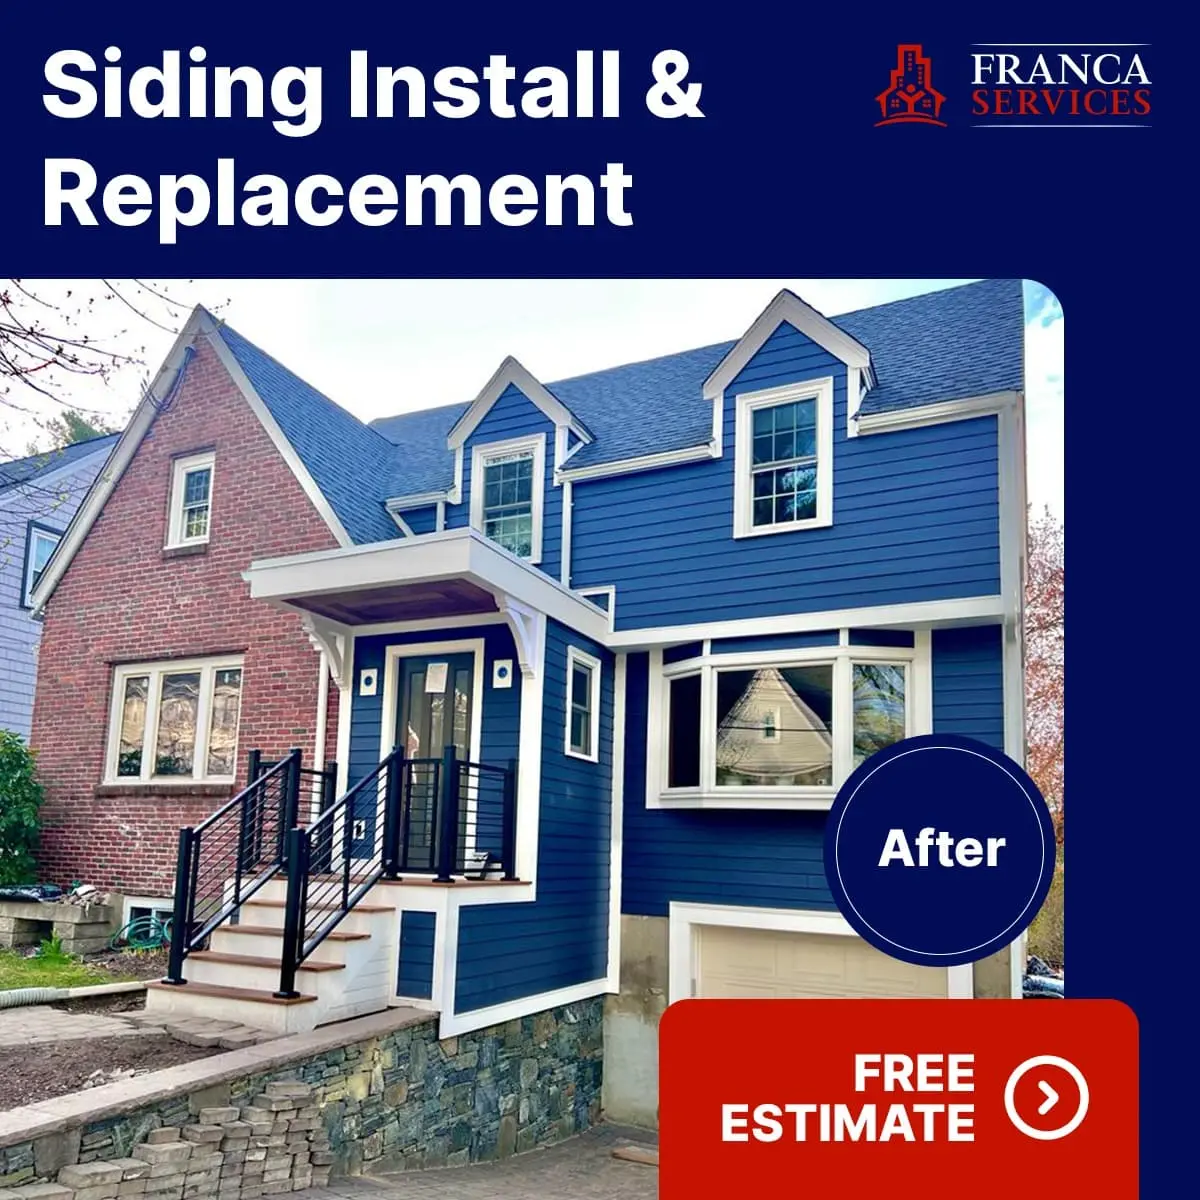 siding replacement service after in Allston